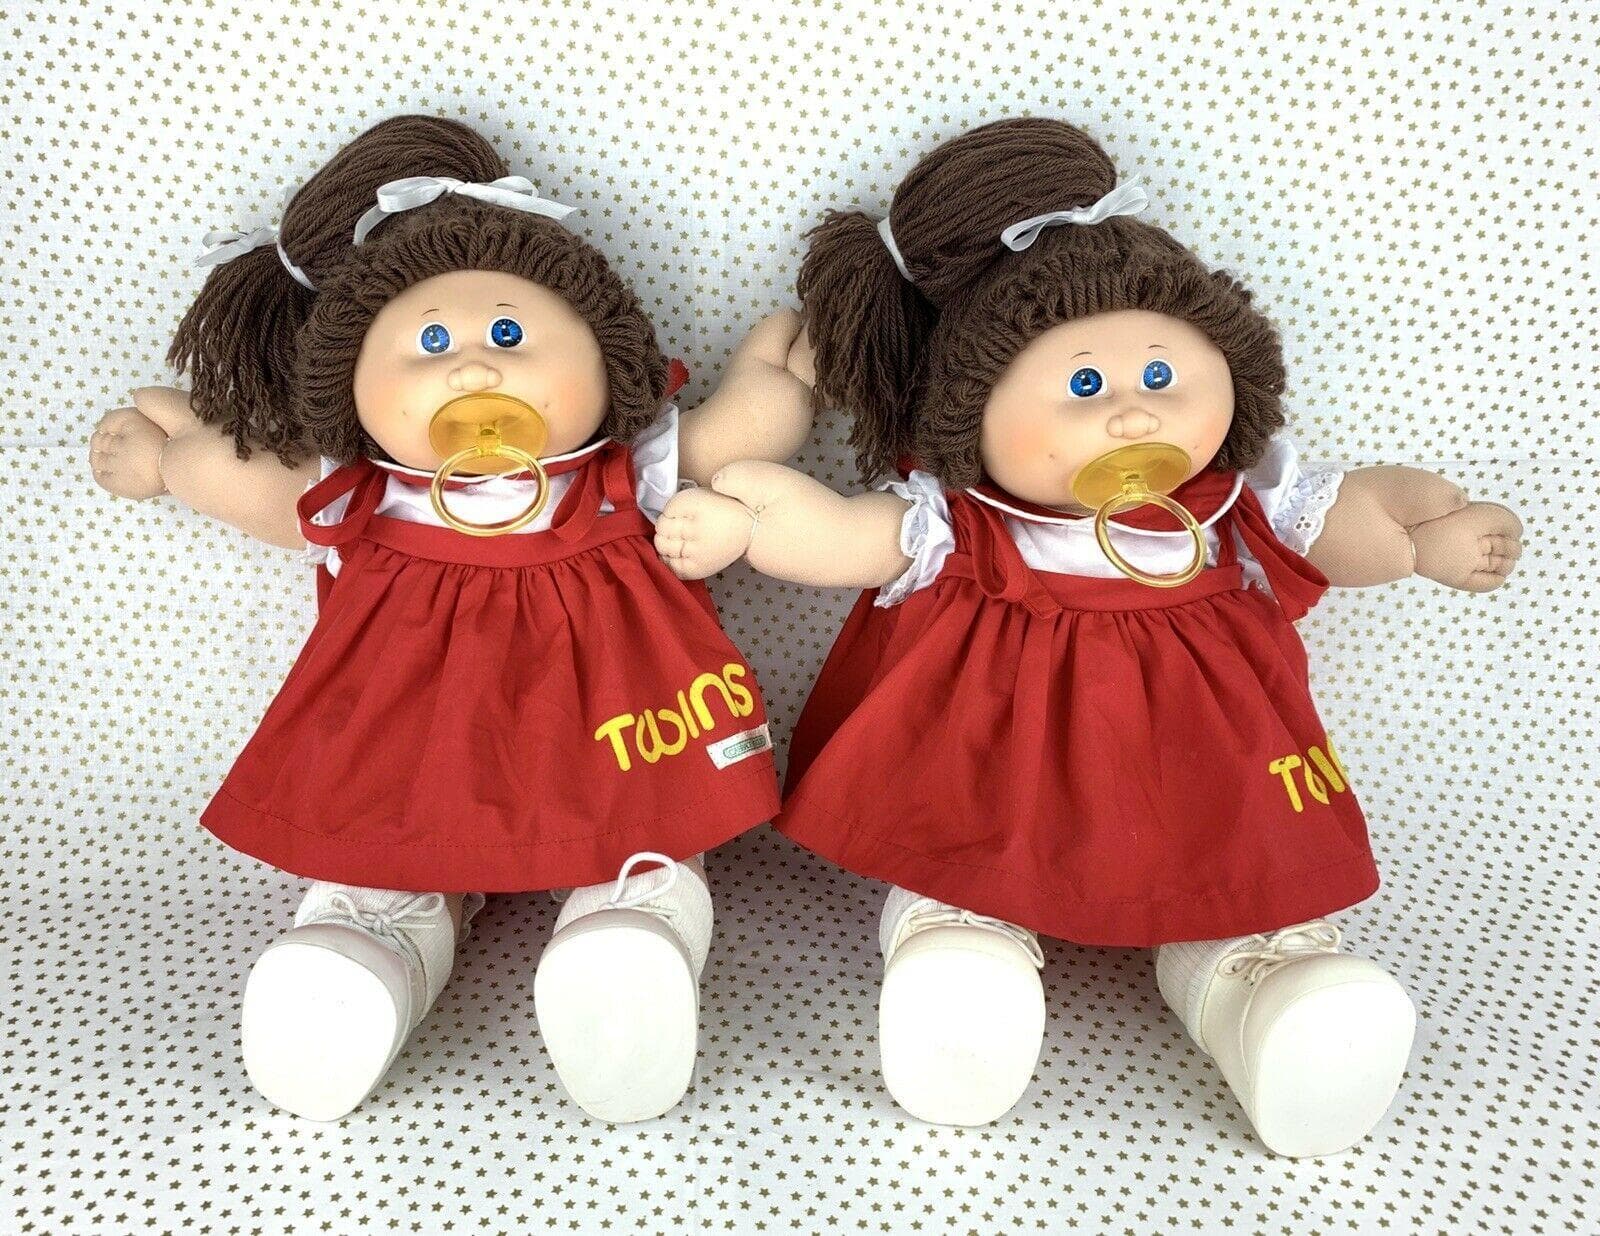 cabbage patch dolls that are worth money